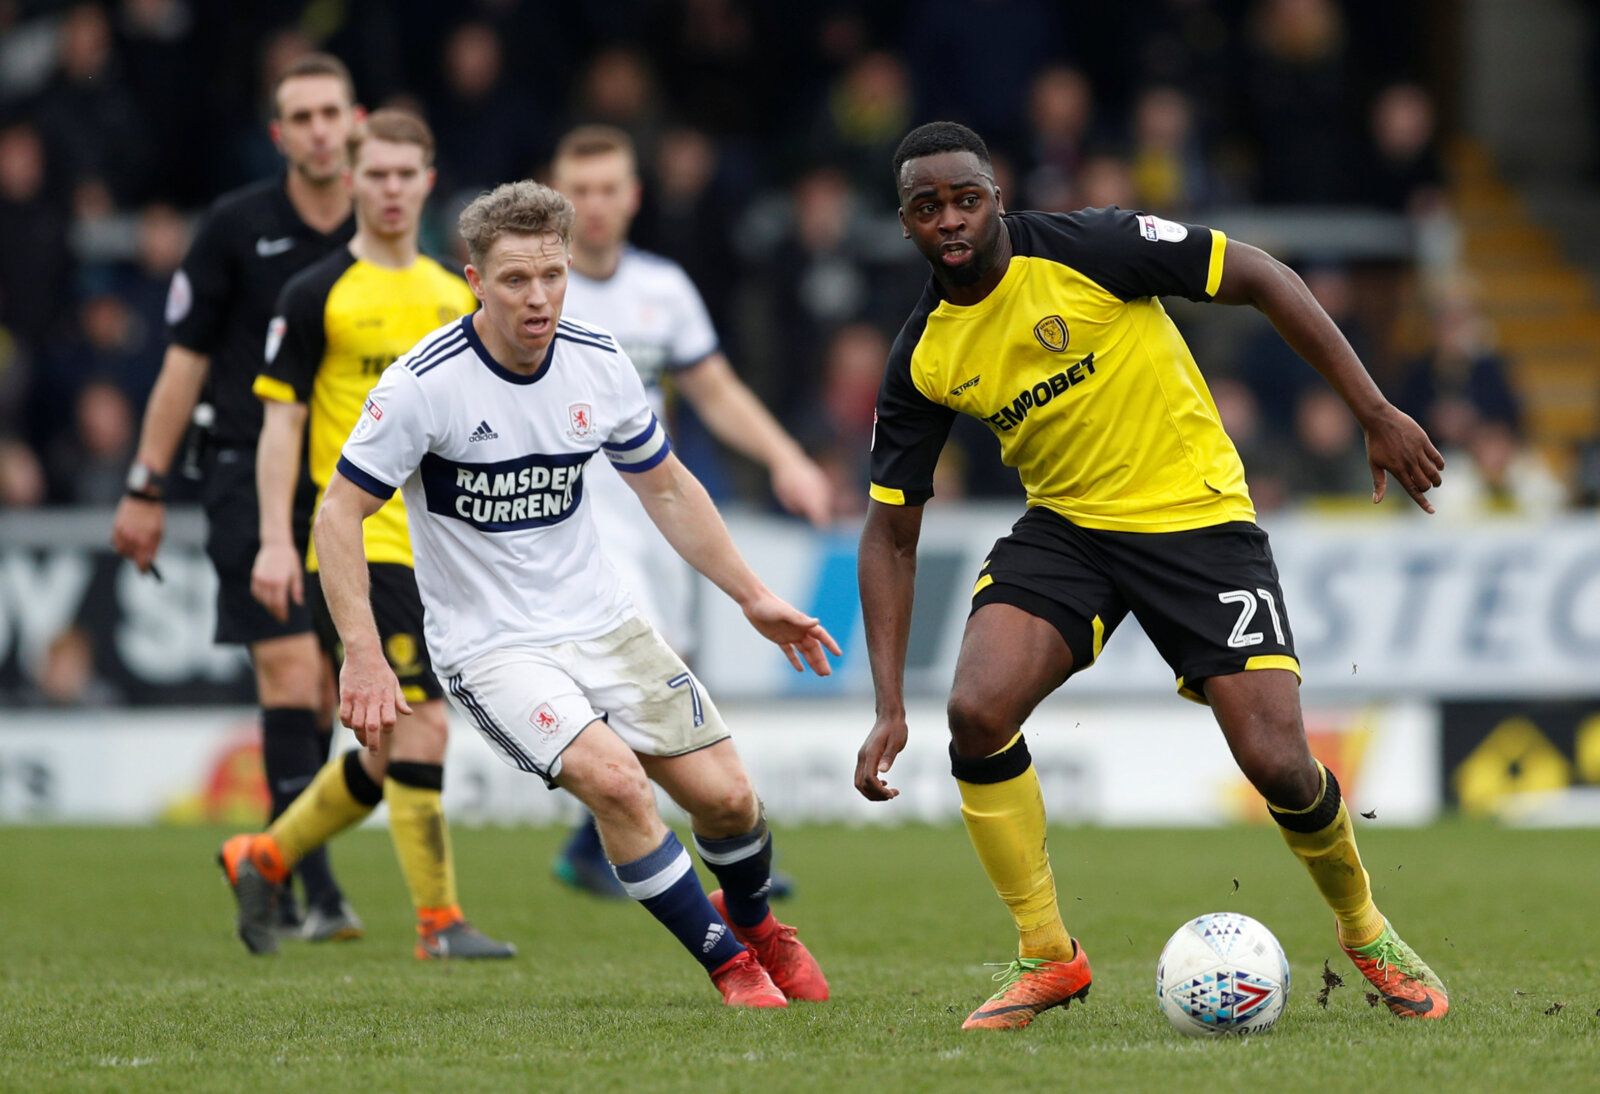 Soccer Football - Championship - Burton Albion vs Middlesbrough - Pirelli Stadium, Burton-on-Trent, Britain - April 2, 2018   Burton Albion's Hope Akpan in action with Middlesbrough's Grant Leadbitter         Action Images/Andrew Boyers    EDITORIAL USE ONLY. No use with unauthorized audio, video, data, fixture lists, club/league logos or 